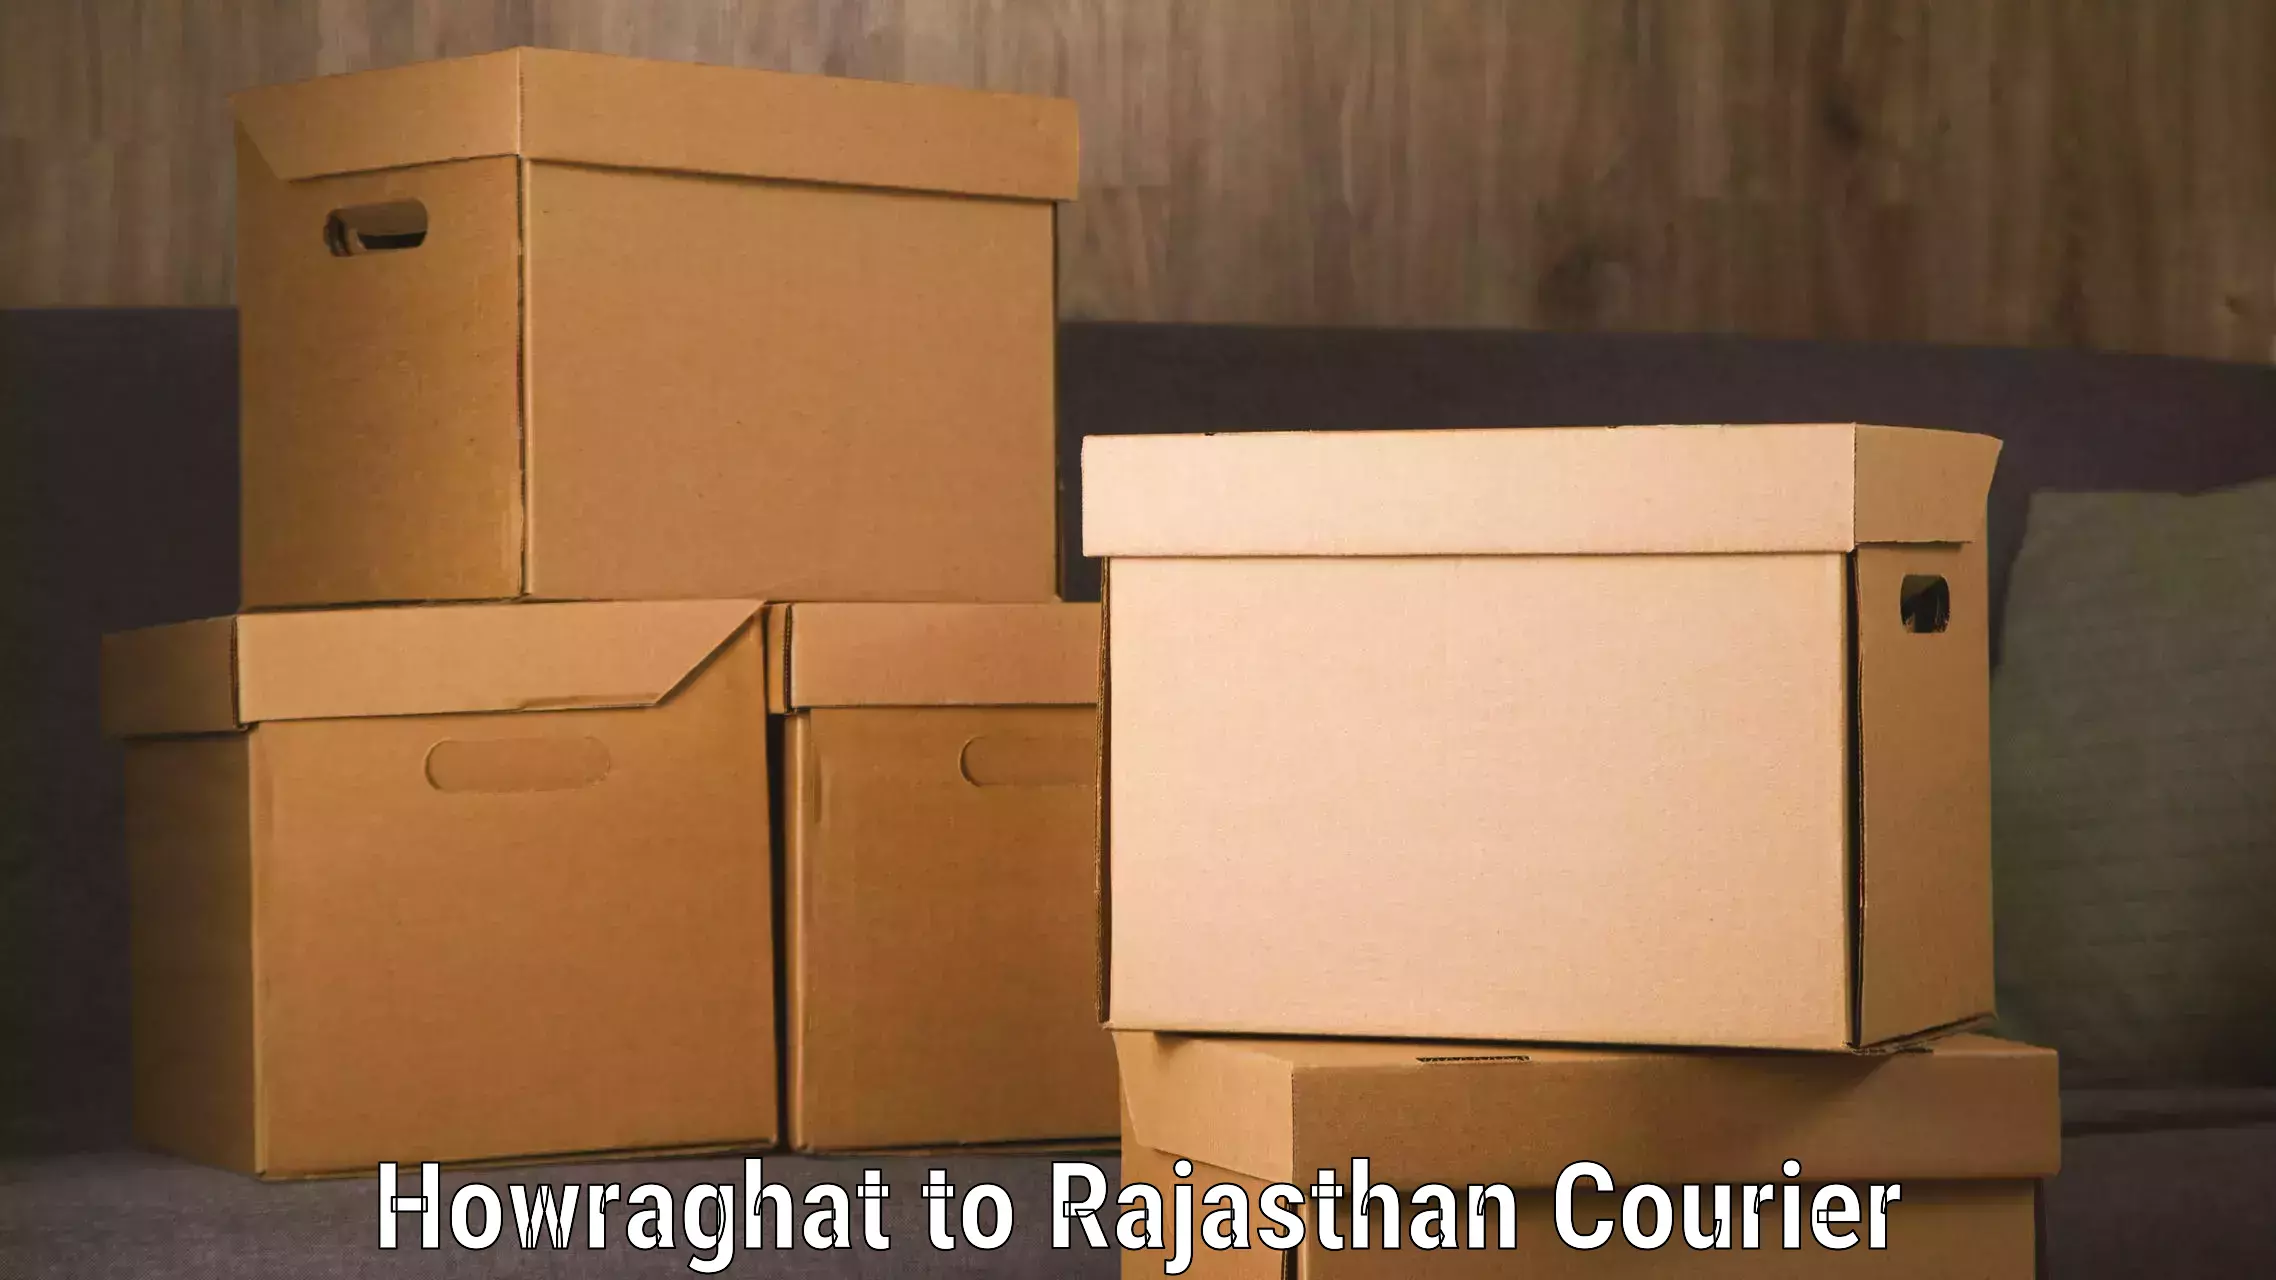 Baggage delivery scheduling Howraghat to Srimadhopur